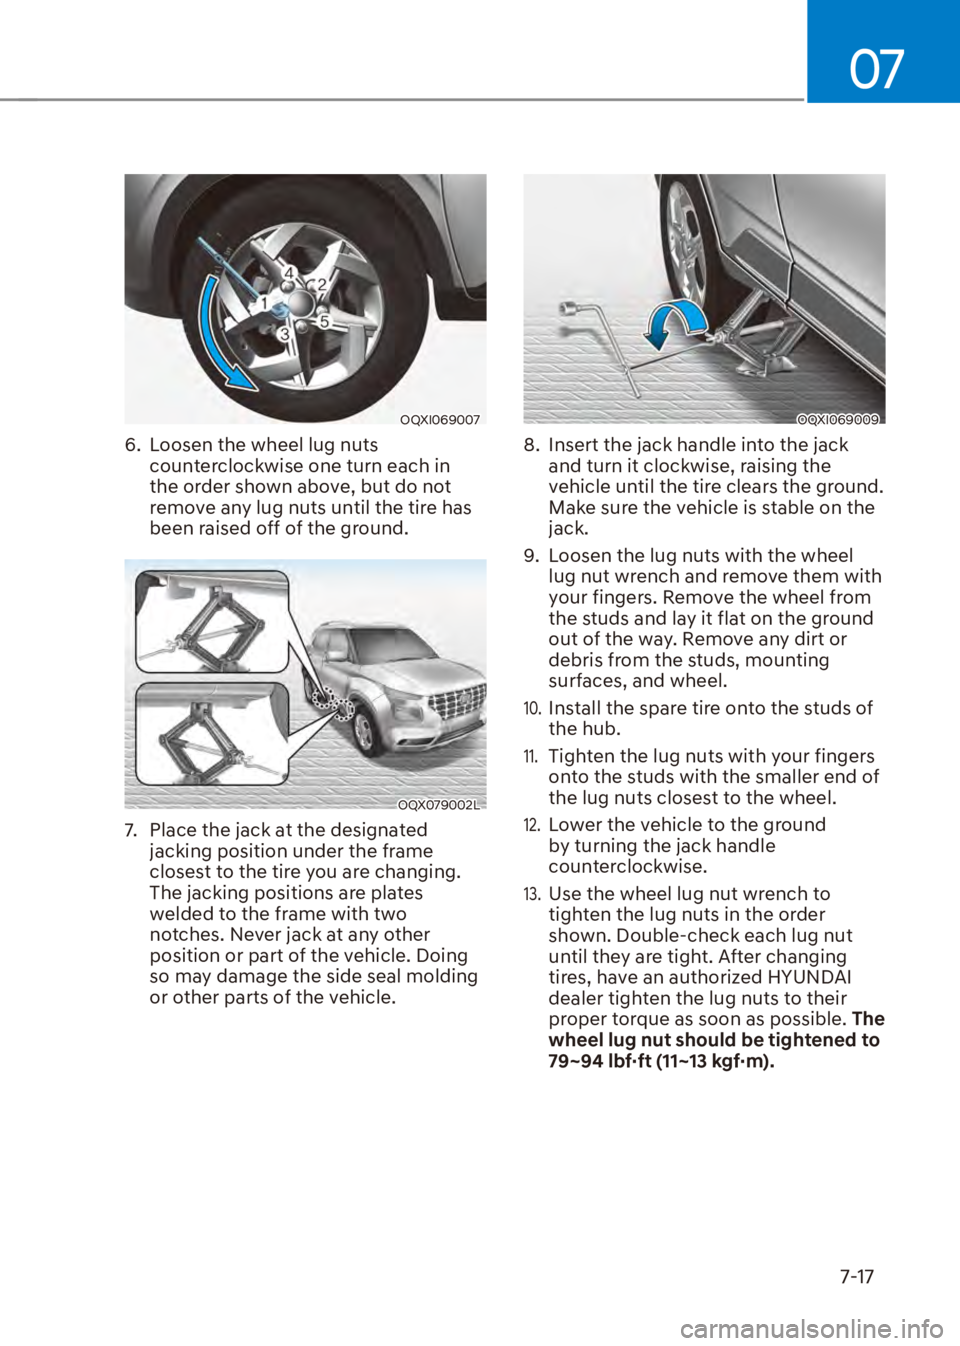 HYUNDAI VENUE 2023  Owners Manual 07
7-17
OQXI069007
6.  Loosen the wheel lug nuts counterclockwise one turn each in 
the order shown above, but do not 
remove any lug nuts until the tire has 
been raised off of the ground.
OQX079002L